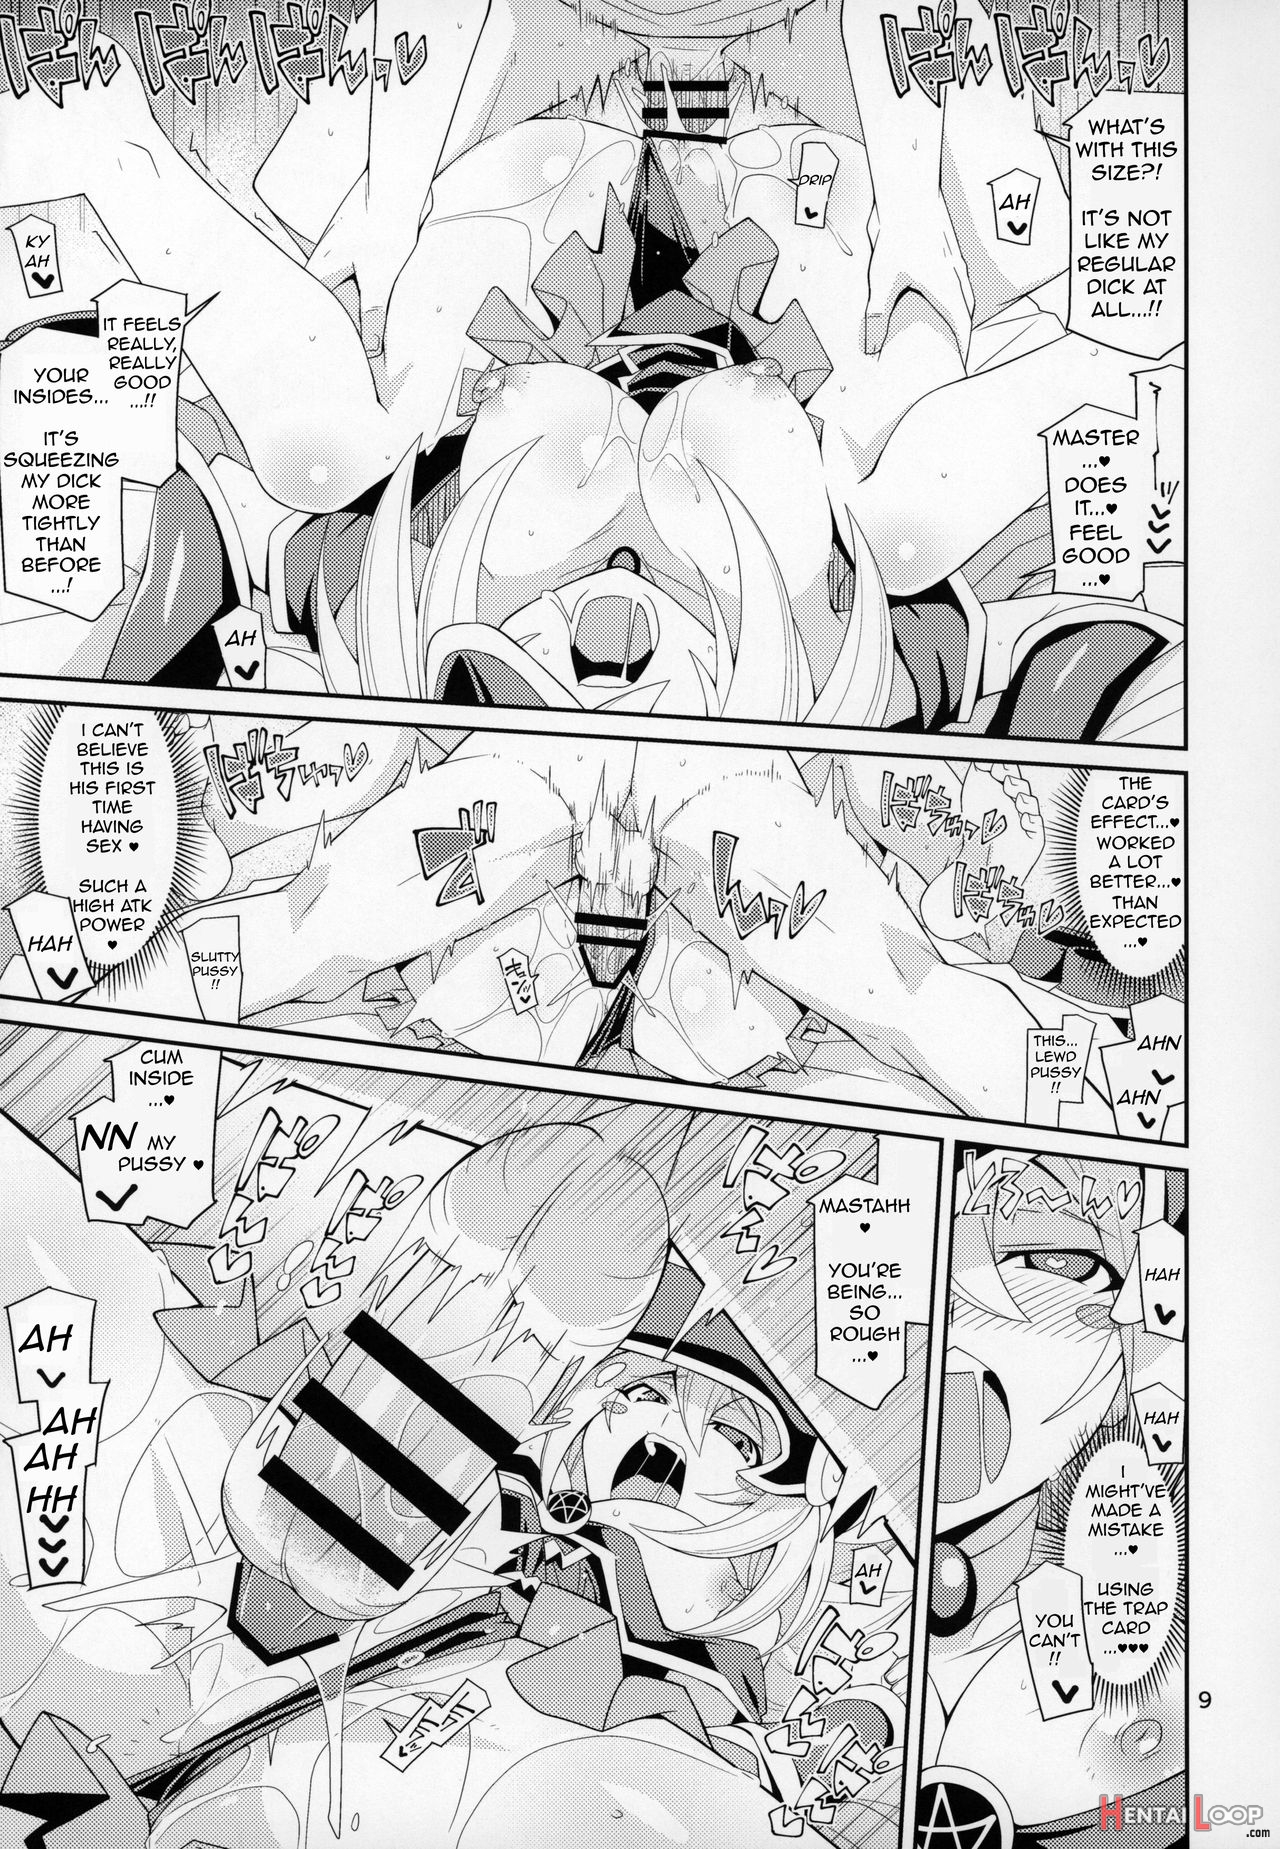 Sex Life With -servant- Bmg page 8